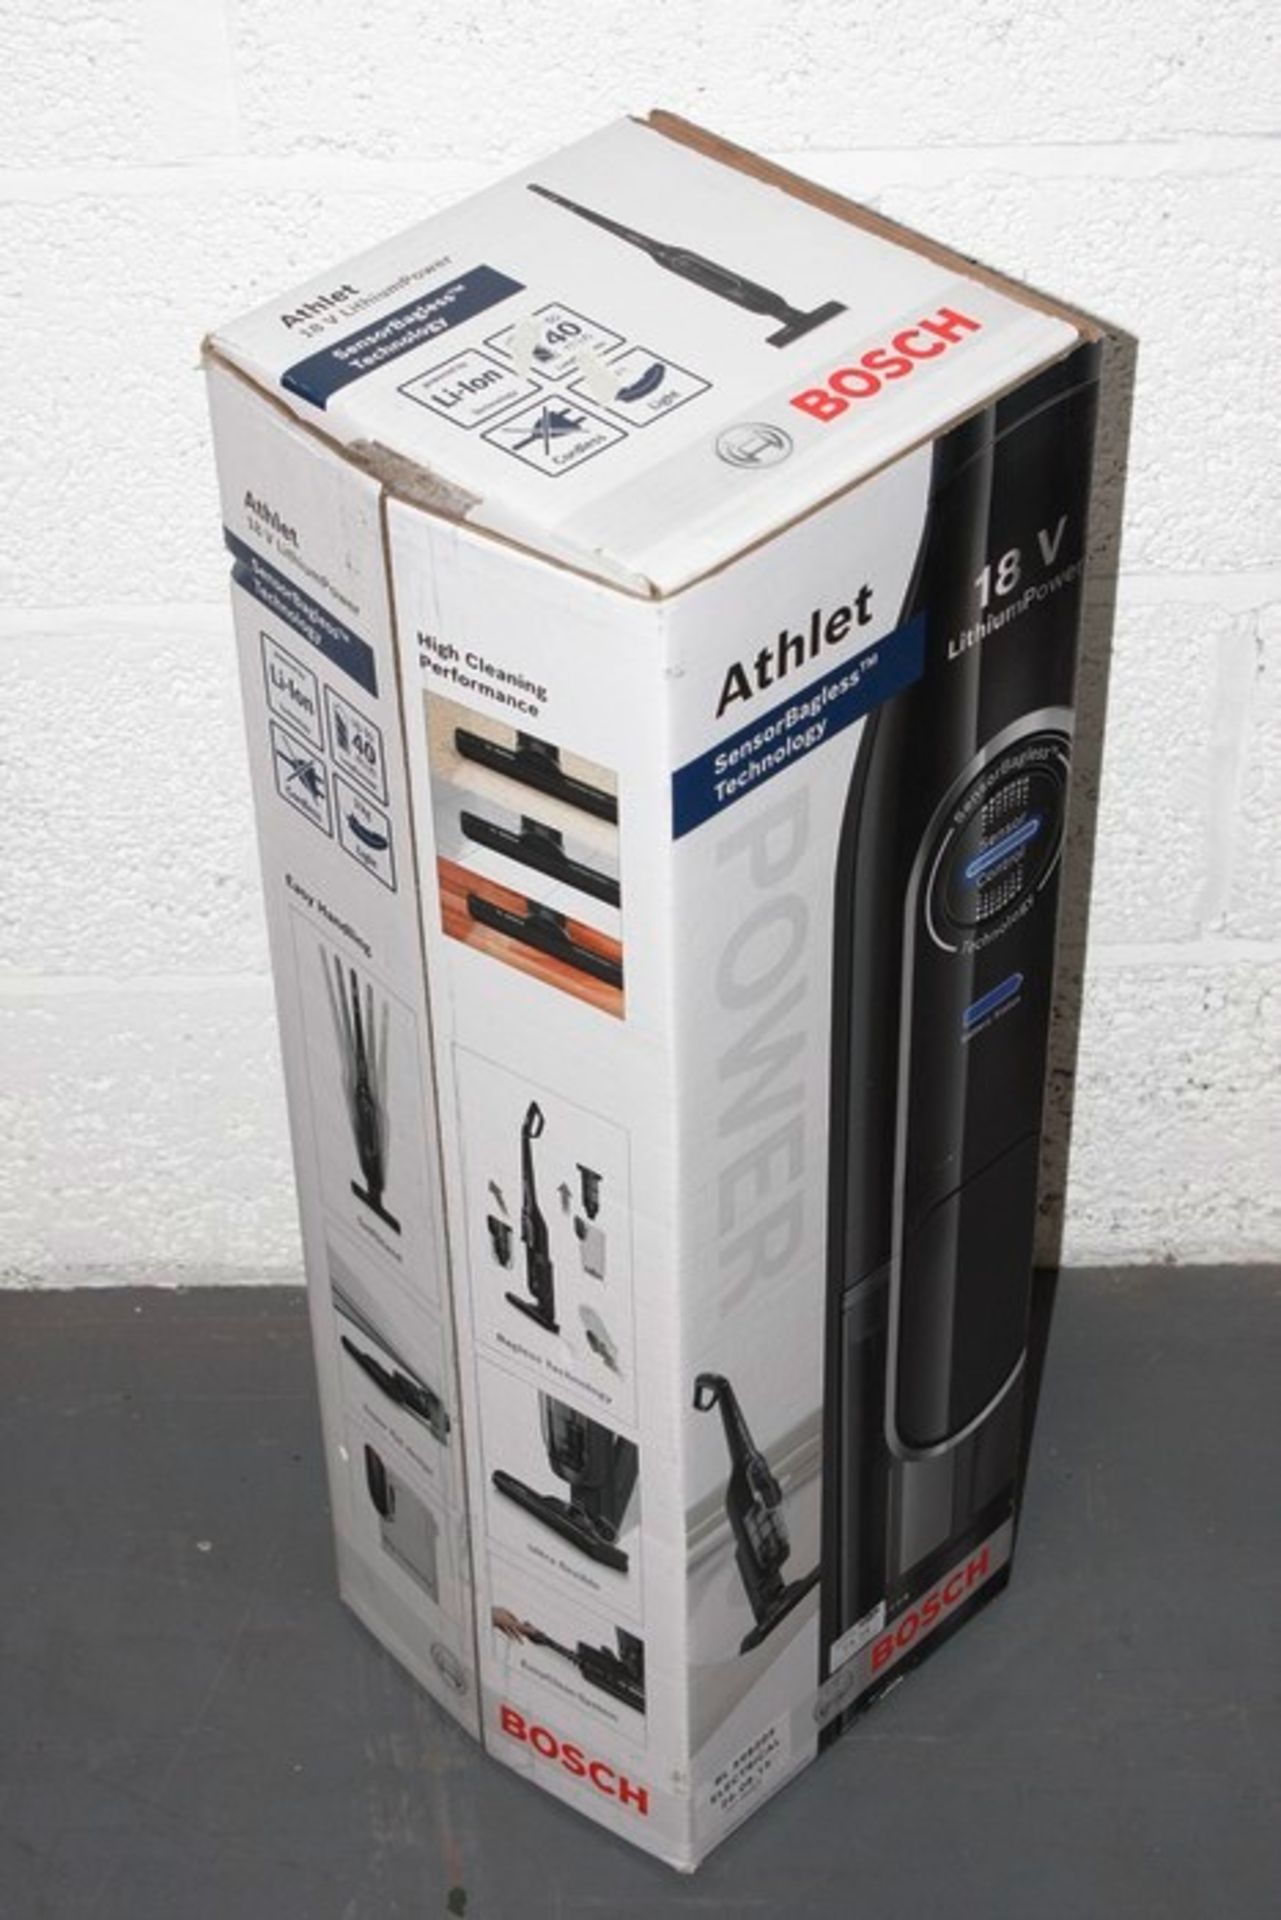 BOXED BOSCH ATHLET 18 VOLT LITHIUM POWER ULTRA LIGHTWEIGHT CORDLESS VACUUM CLEANER RRP: £200